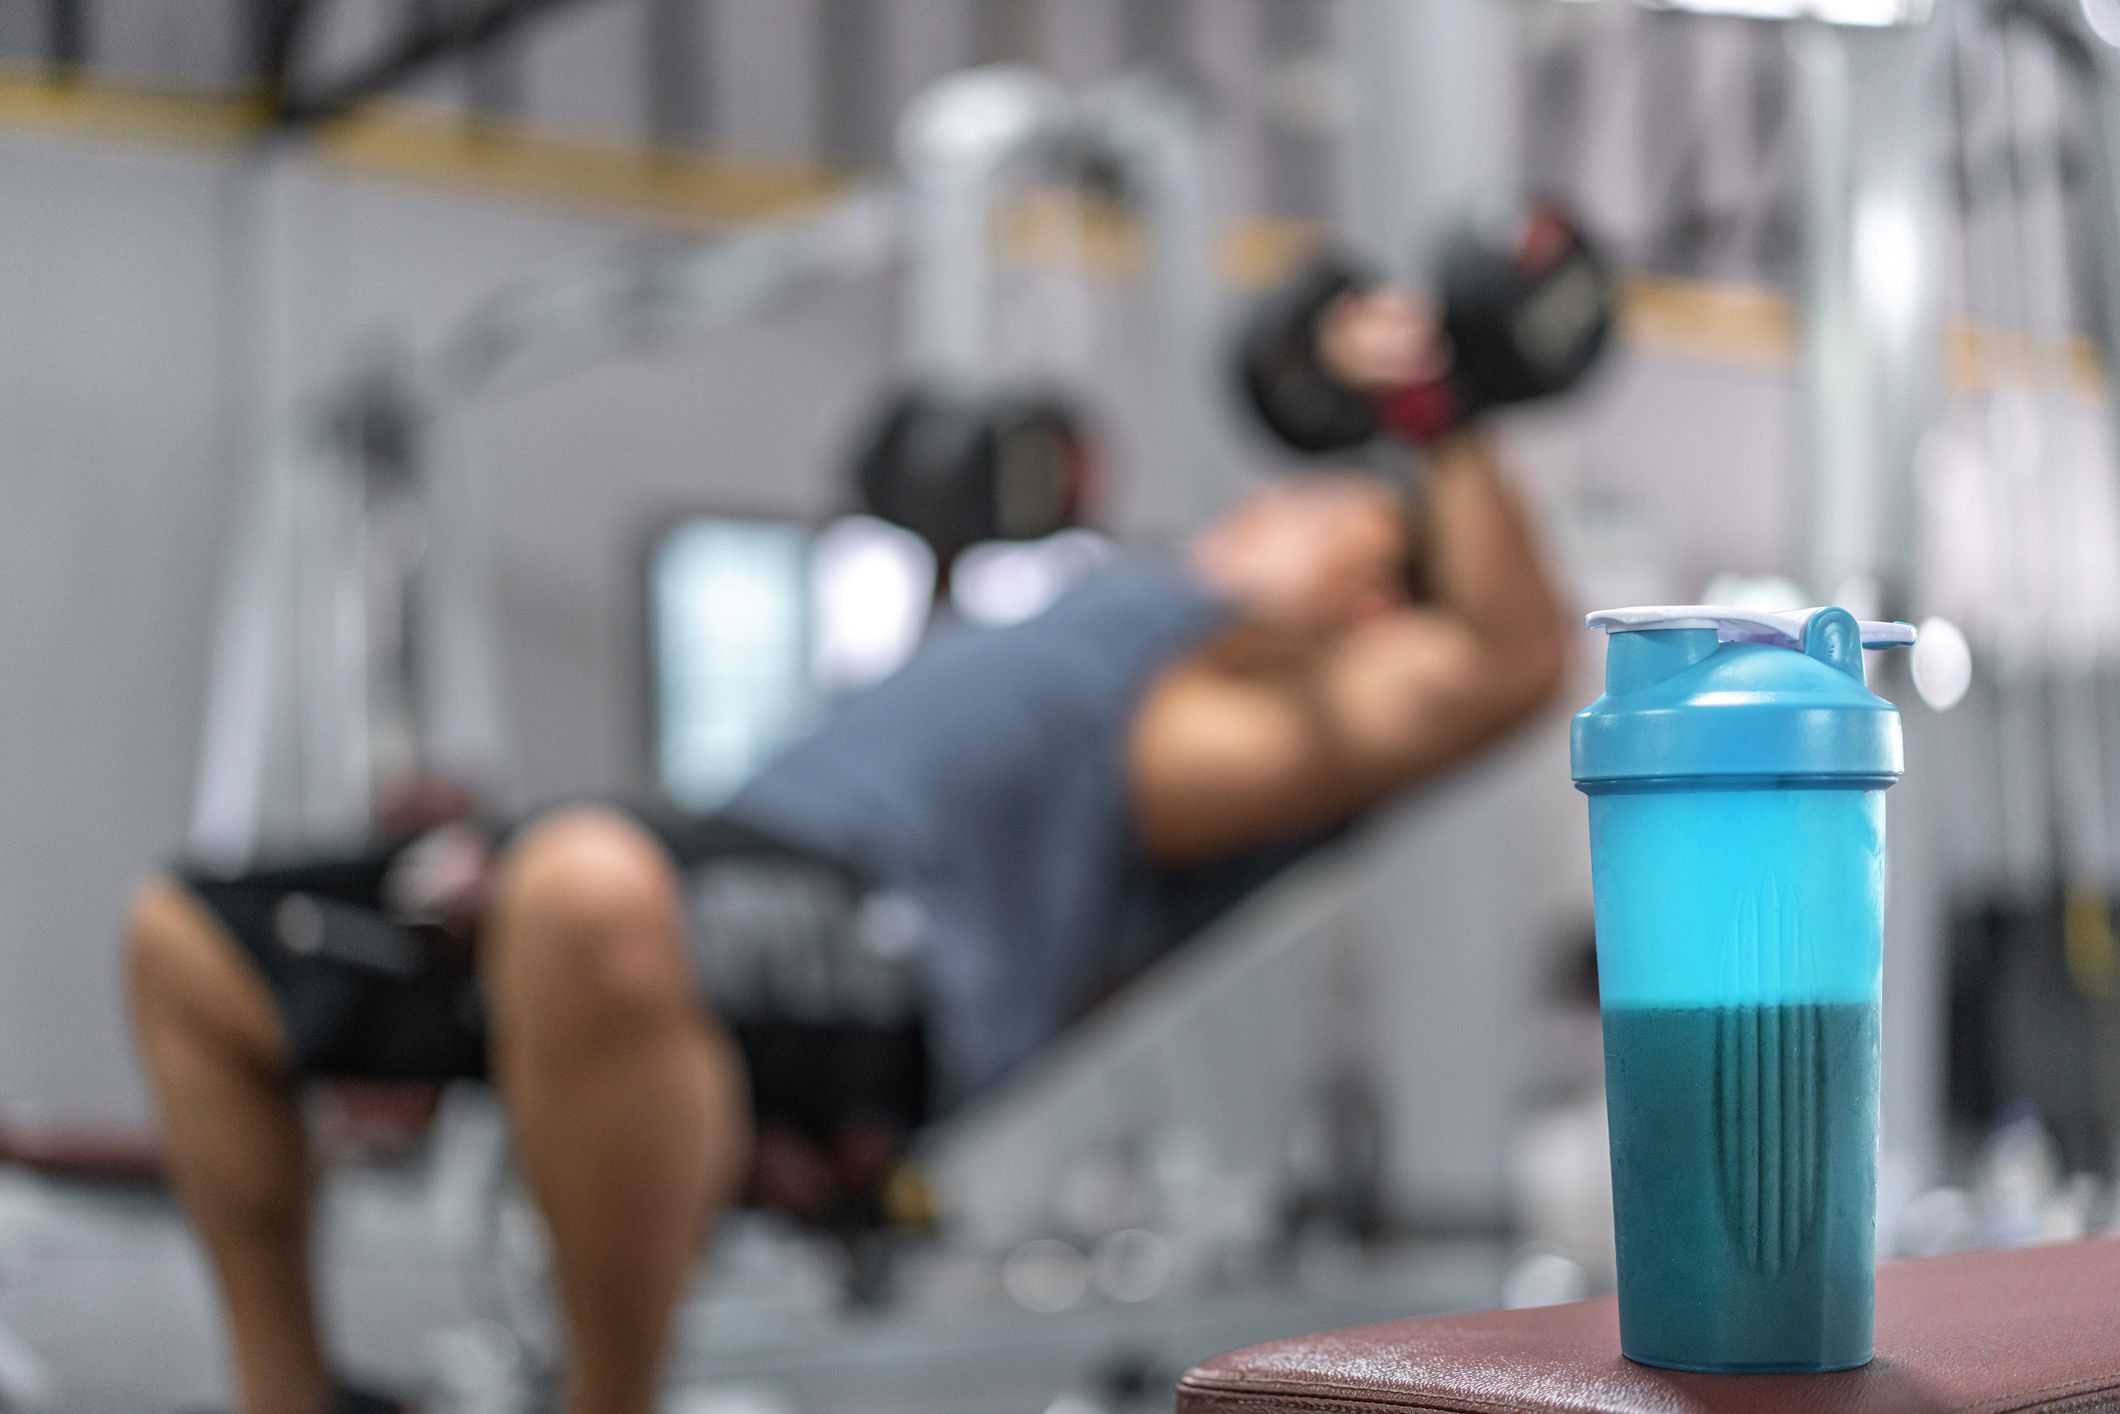 Muscle-building protein shakes may threaten health